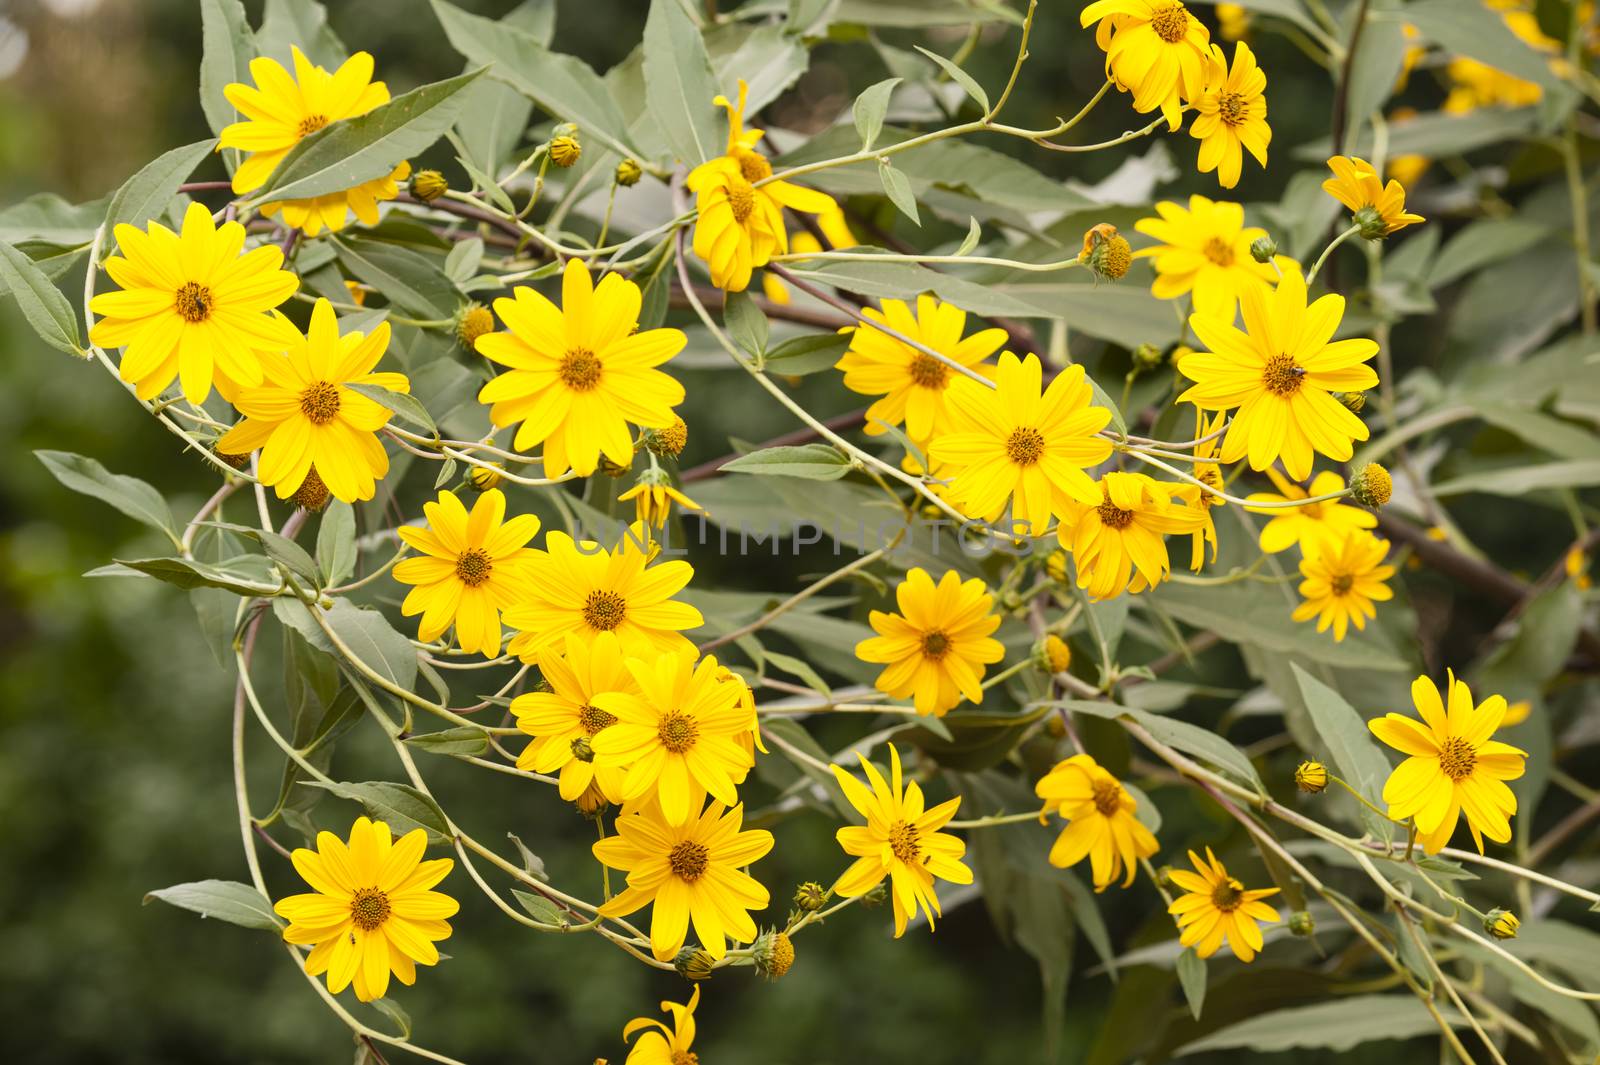 Jerusalem artichoke (Helianthus tuberosus), sunroot, sunchoke, earth apple or topinambour, species of sunflower native to eastern North America, cultivated across the temperate zone for its edible tuber.